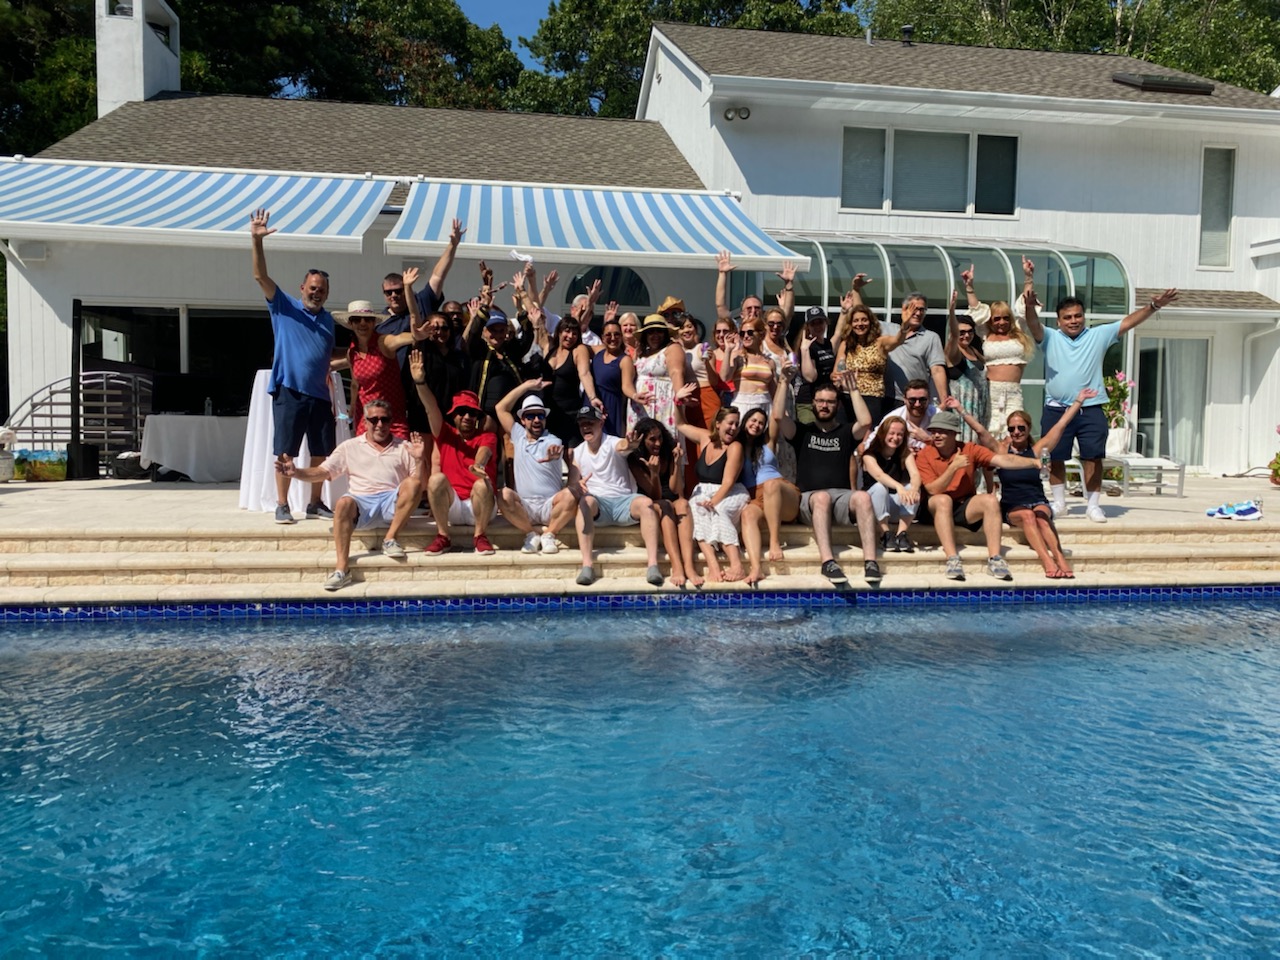 Schneps staff pool party in Westhampton